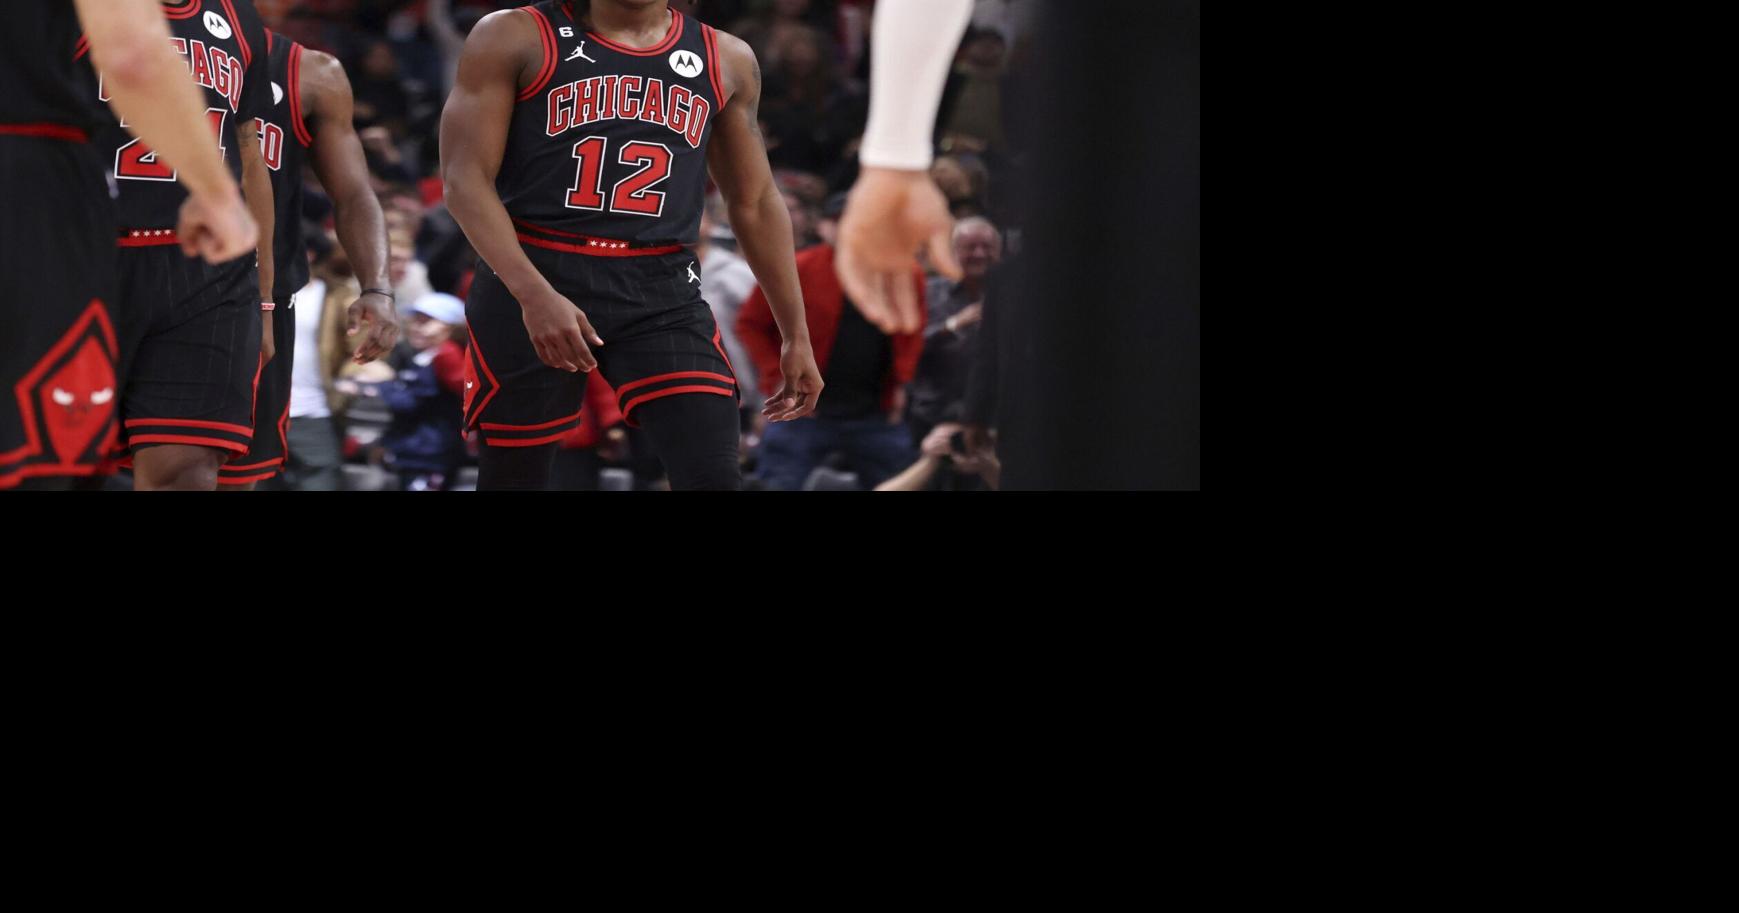 Ayo Dosunmu of the Chicago Bulls dunks the ball during the game